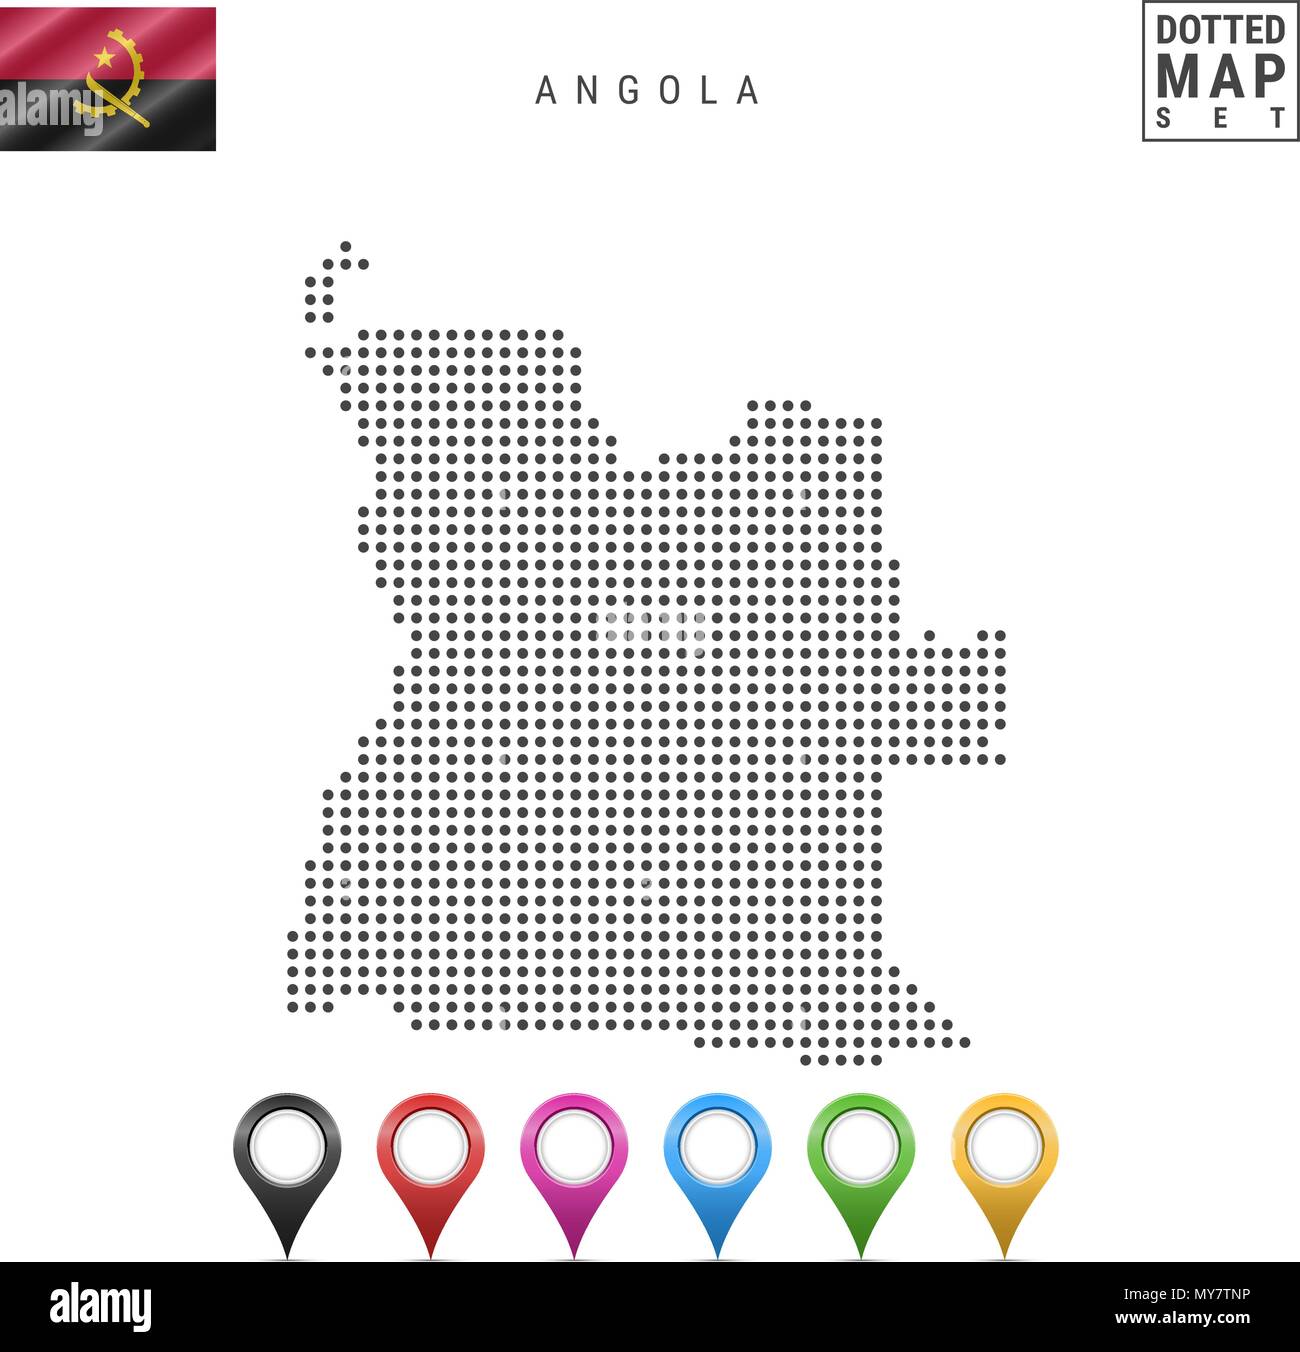 Vector Dotted Map of Angola. Simple Silhouette of Angola. The National Flag of Angola. Set of Multicolored Map Markers Stock Vector